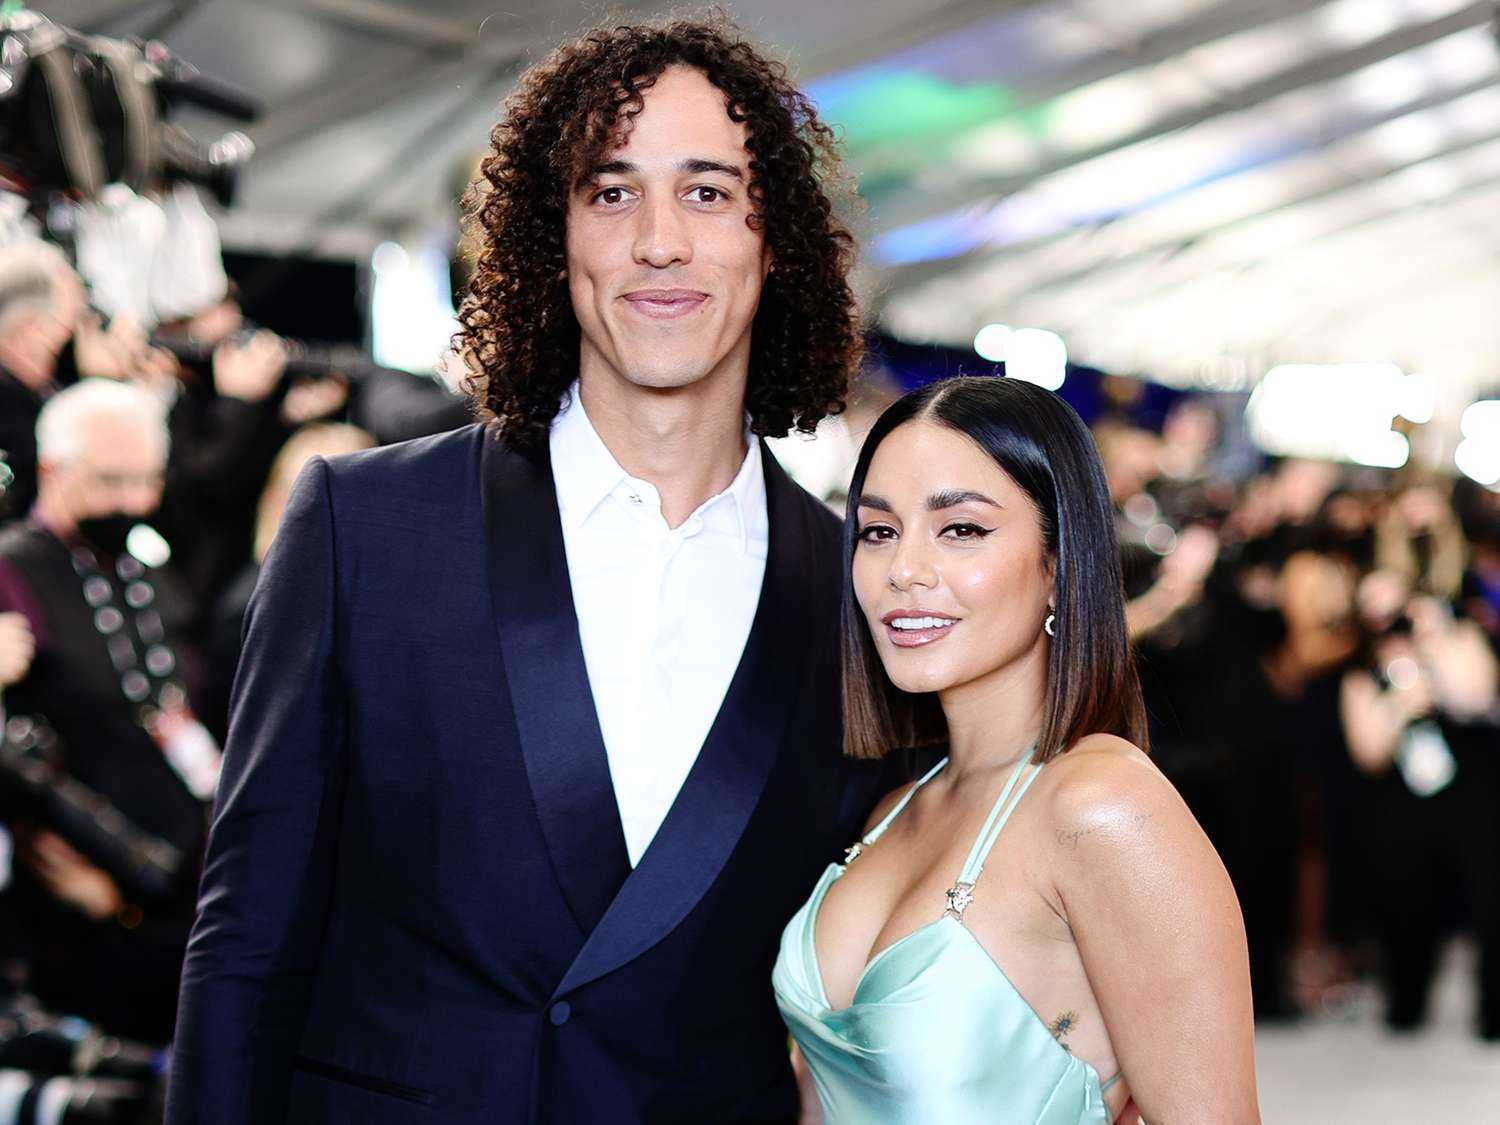 Meet Cole Tucker: The Baseball player now wed to Vanessa Hudgens